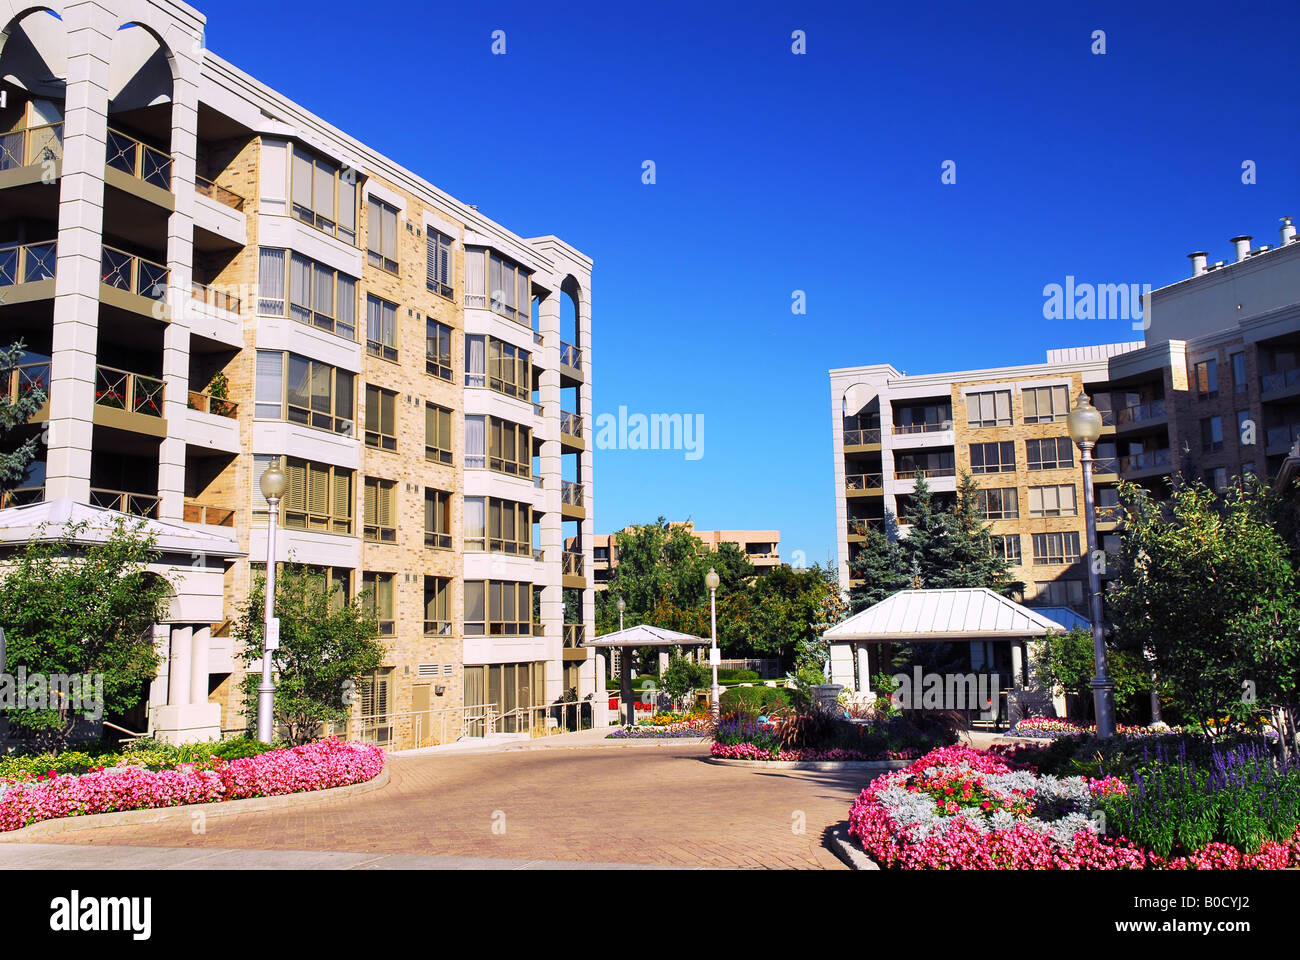 View of modern upscale condominium buildings with landscaping Stock Photo